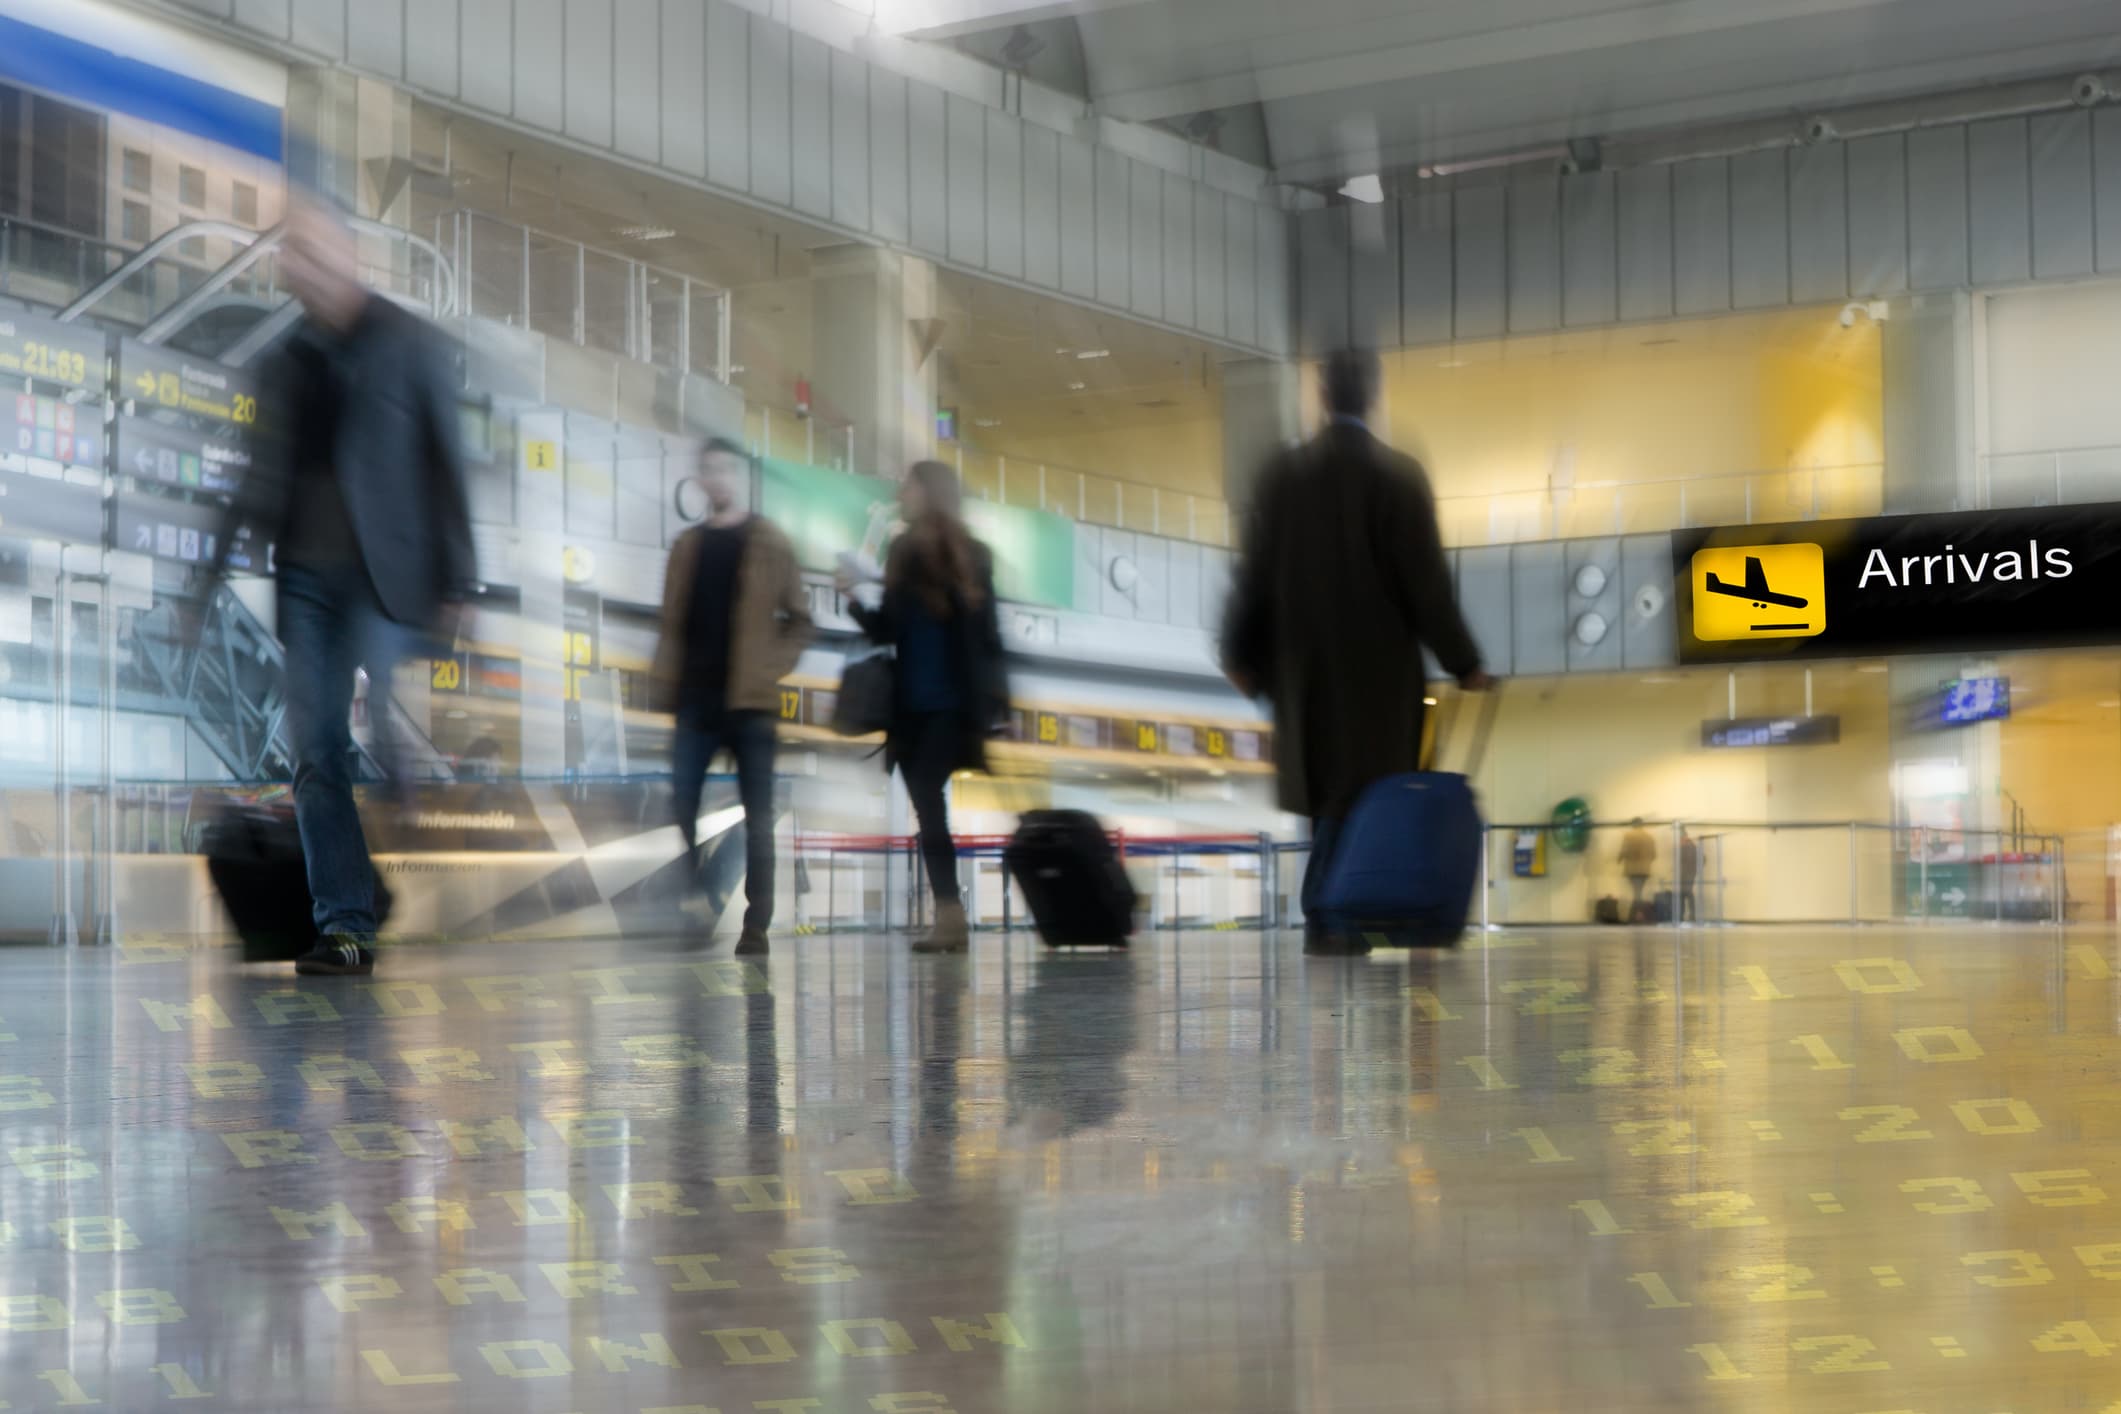 An image of airport passengers moving qjuickly through a terminal